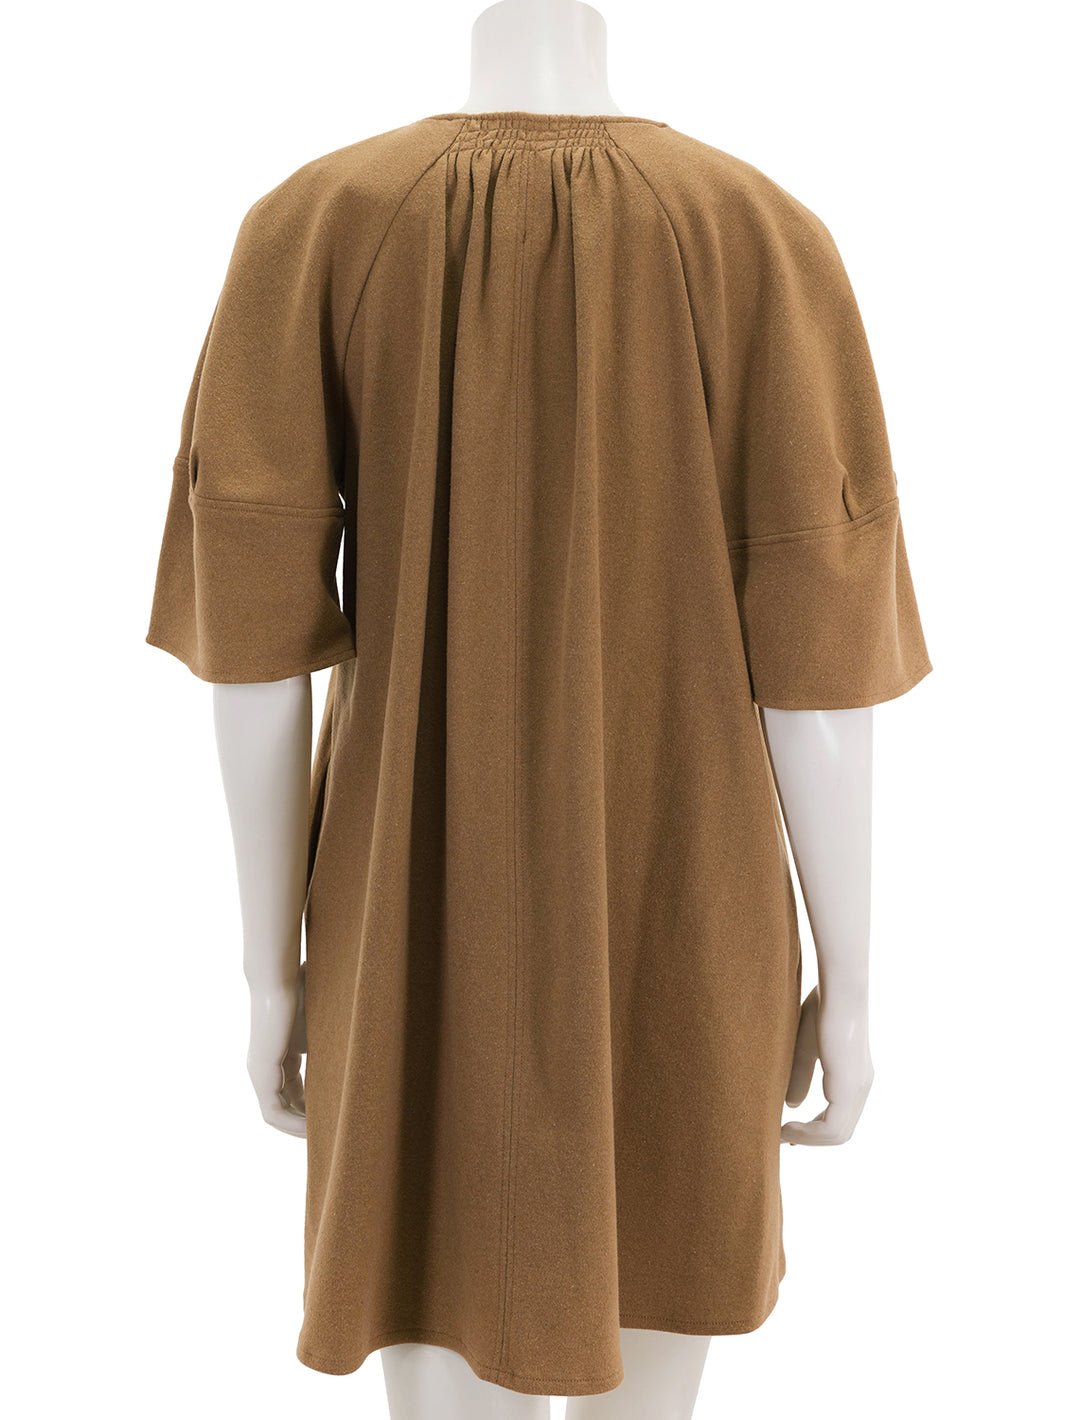 back view of beate dress in camel